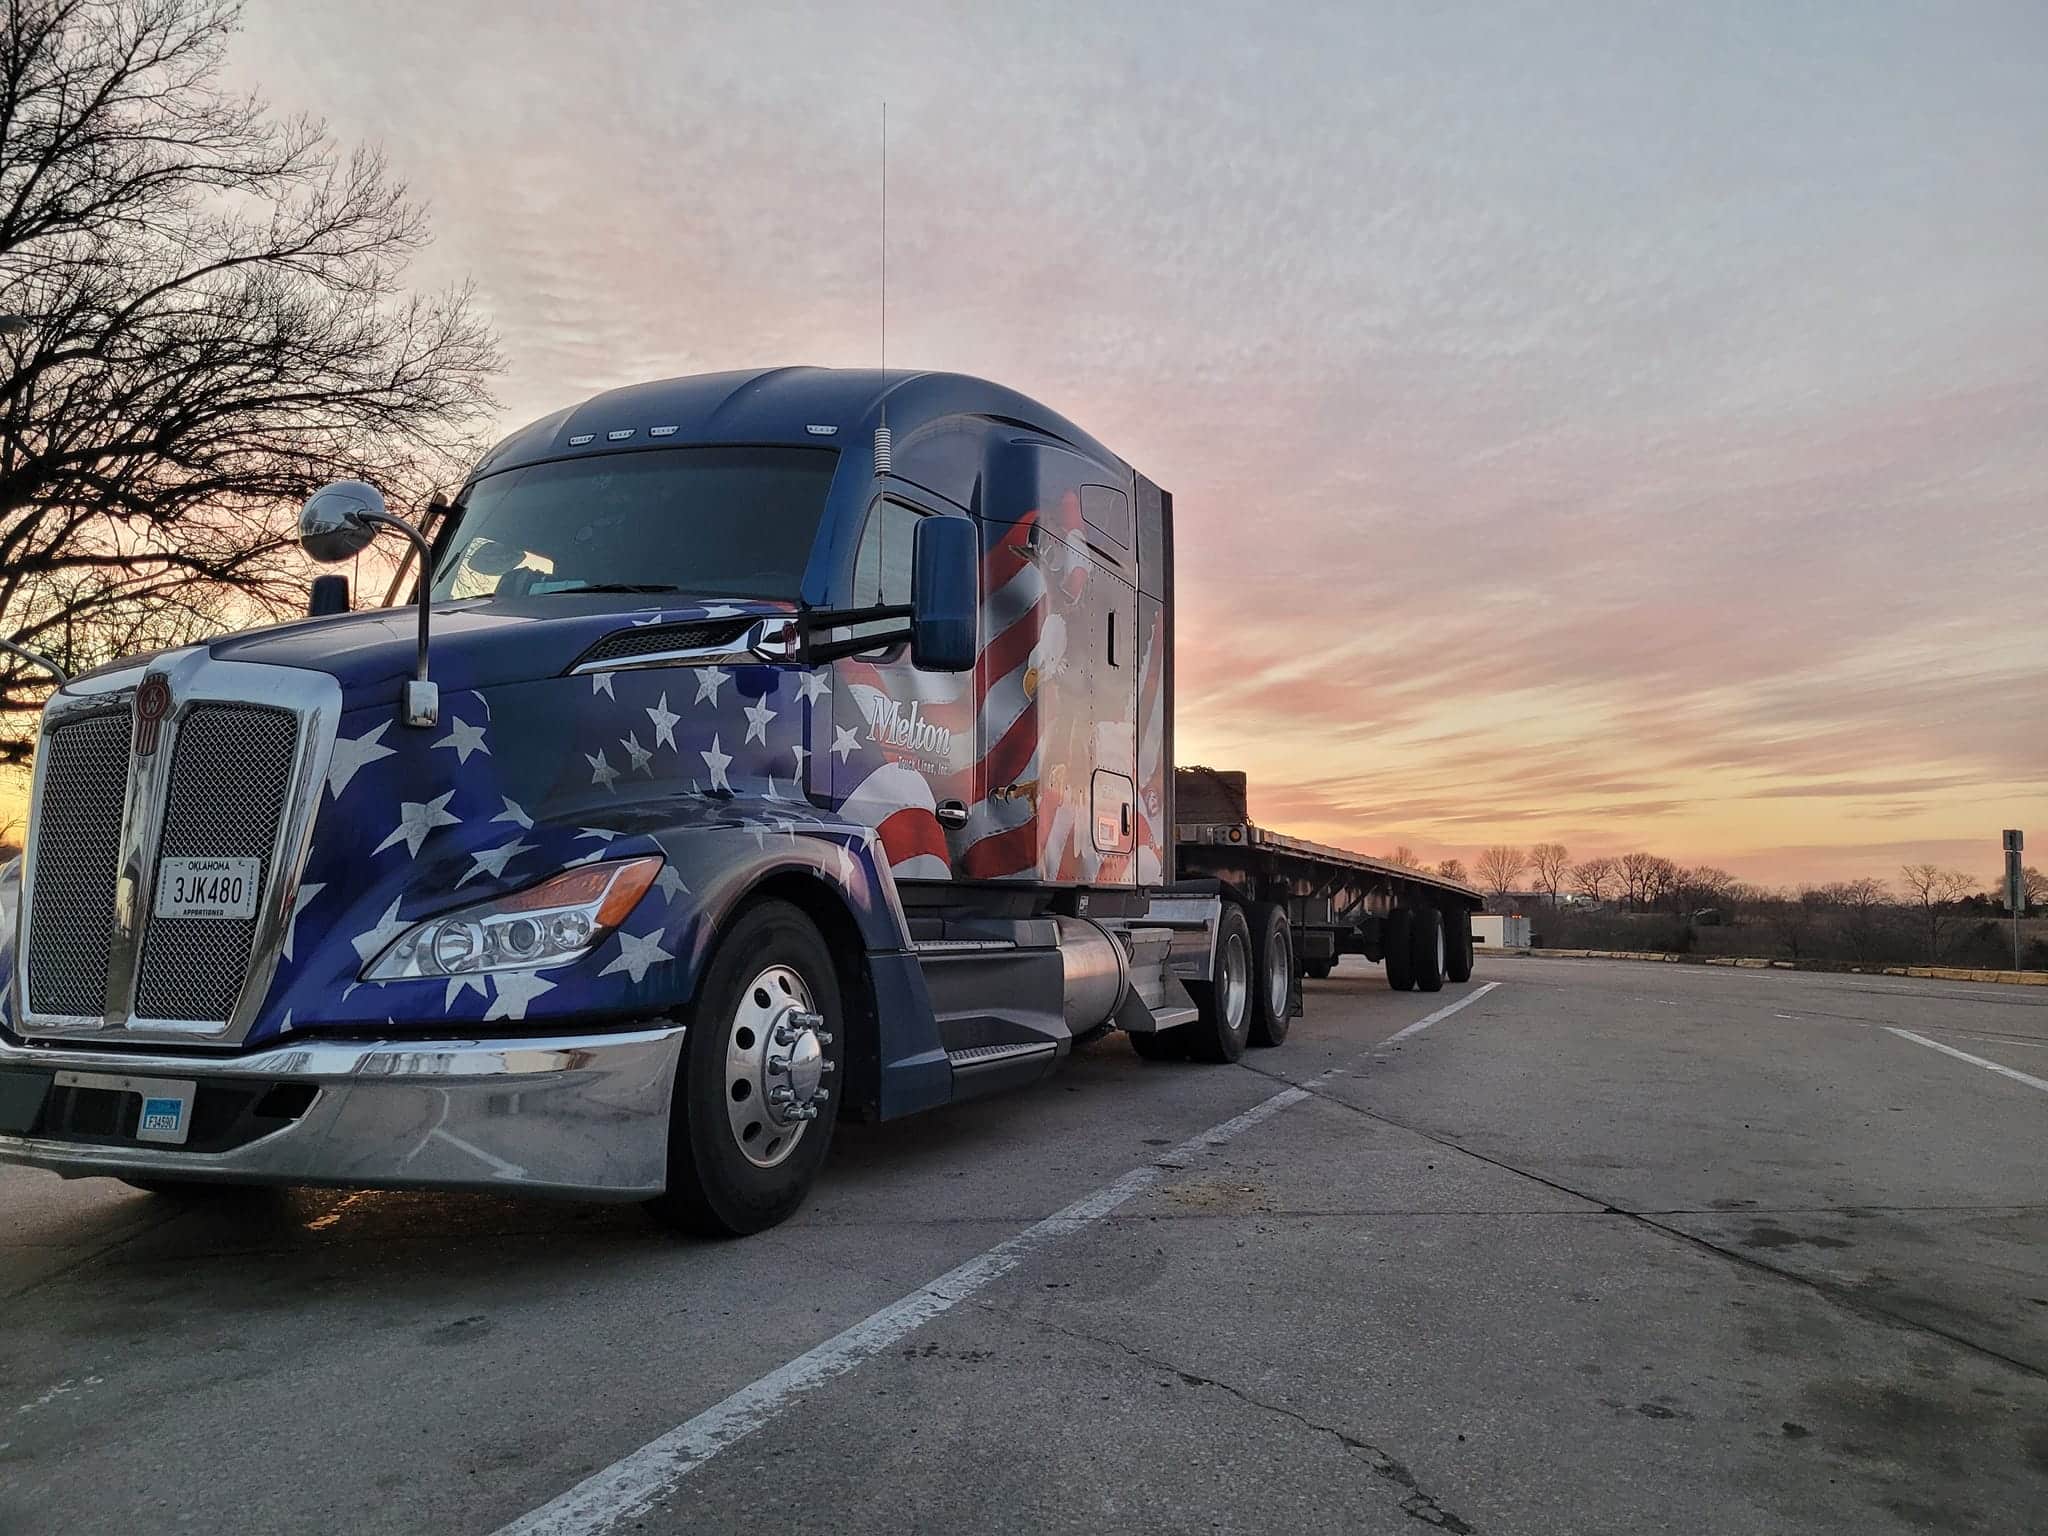 A veteran-wrapped Melton truck parked with a sunset behind it.